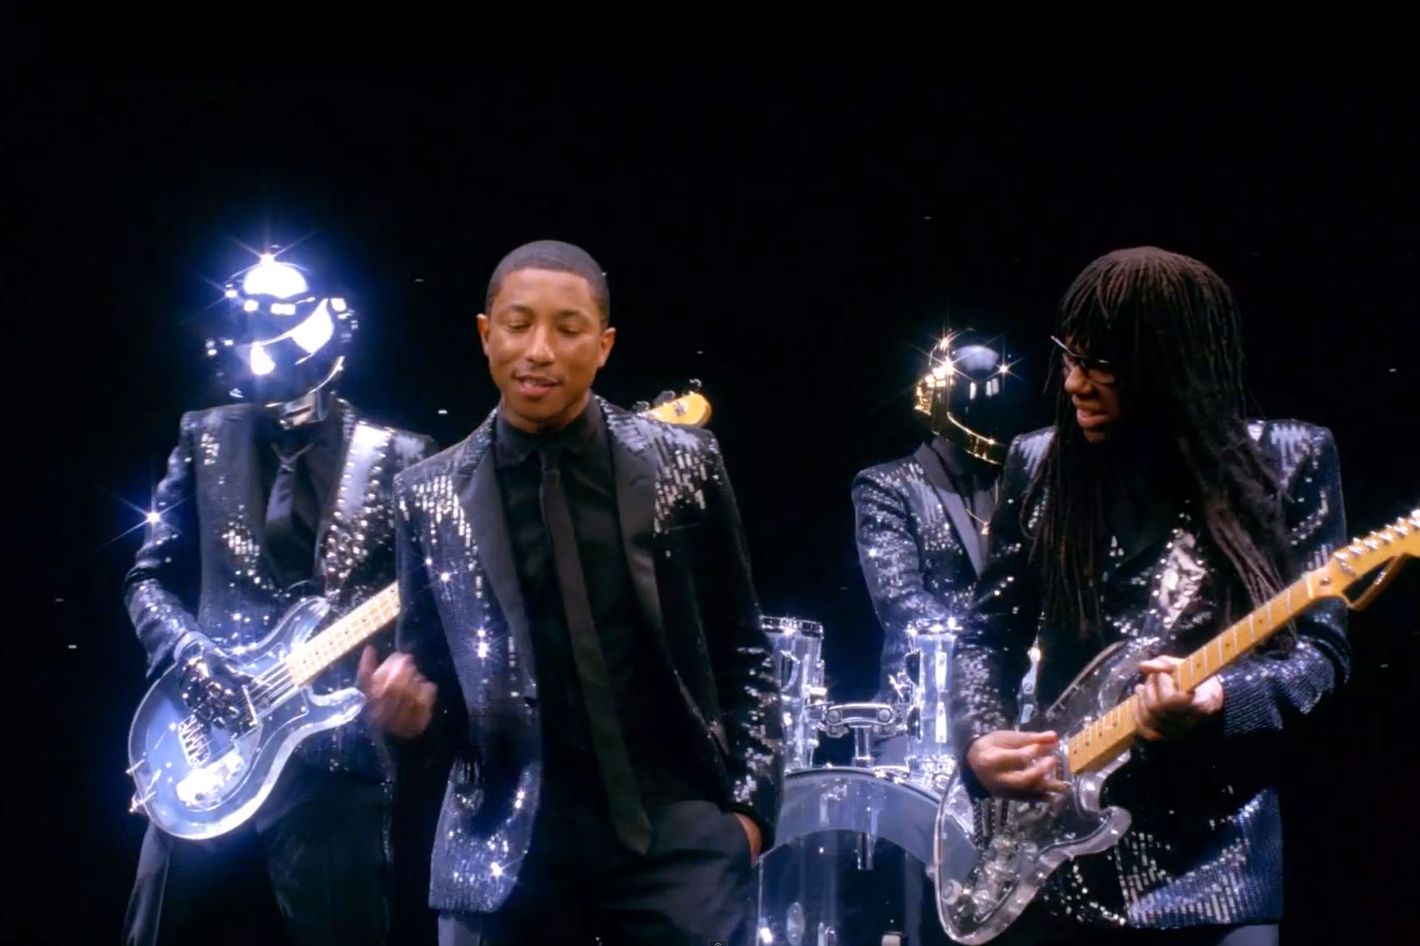 Включи get lucky. Daft Punk Pharrell Williams and Nile Rodgers. Дафт панк get Lucky. Pharrell Williams Daft Punk. Pharrell Williams, Daft Punk, Nile Rodgers - get Lucky.